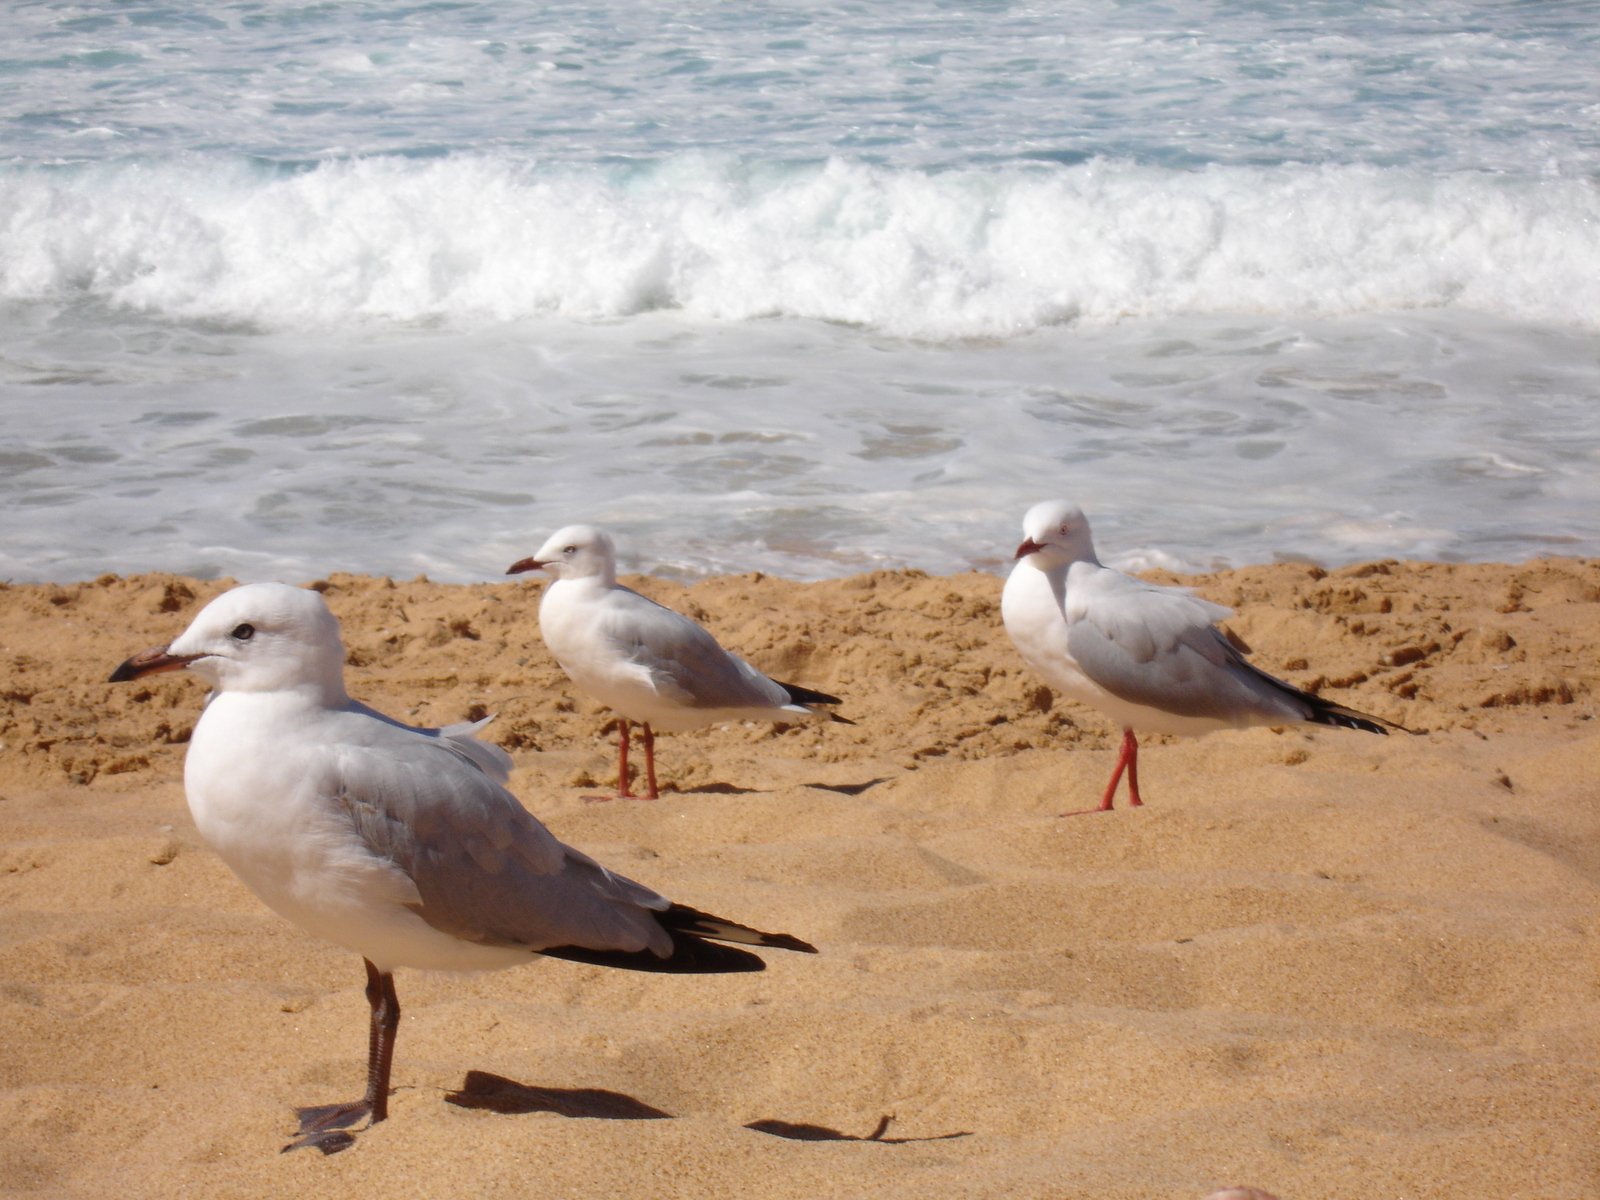 three seagulls standing in the sand near the ocean